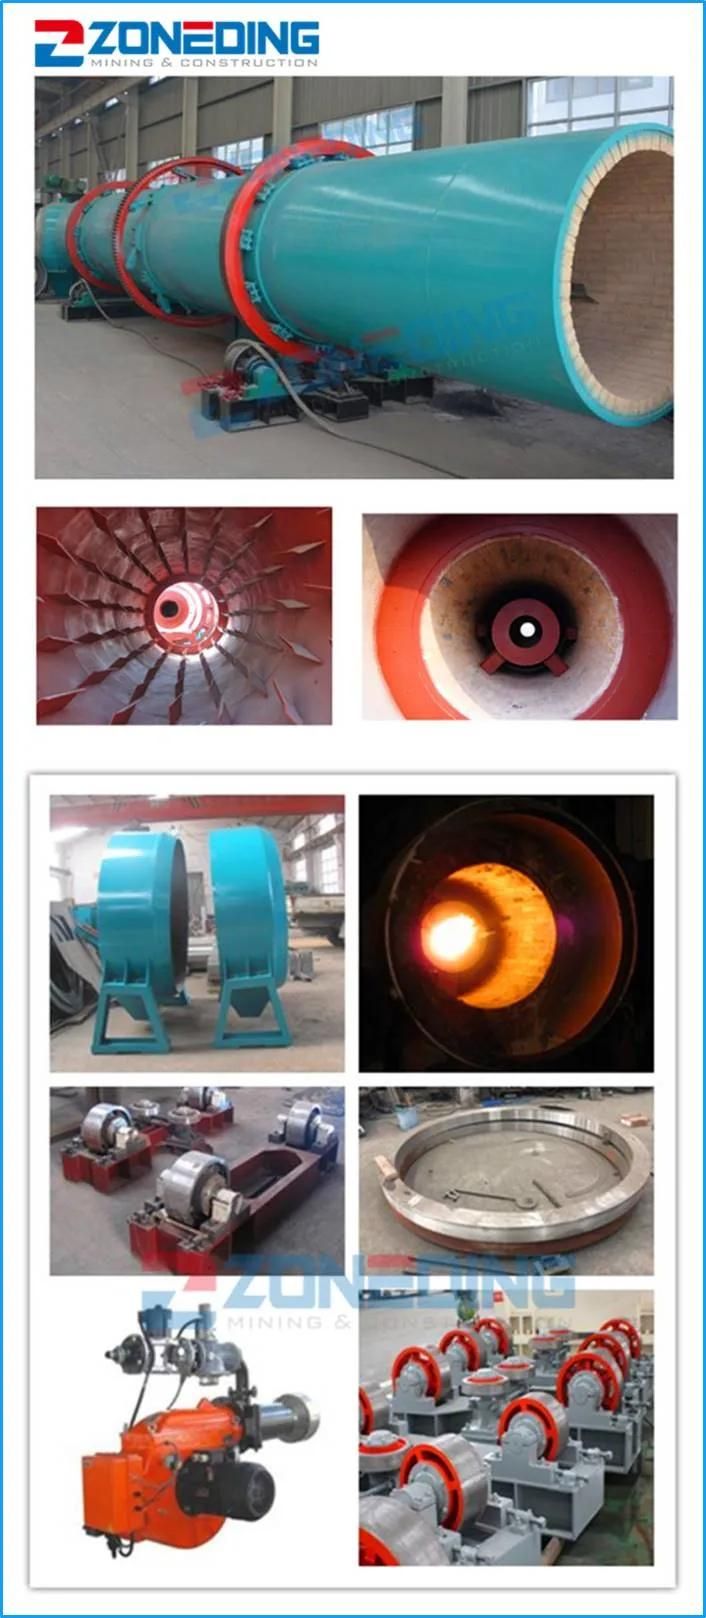 Rotary Dryer Diagram Rotary Dryer Design Rotary Dryer Definition Rotary Dryer Dunelm   Rotary Dryer Dimensions Rotary Dryer Extension Pole